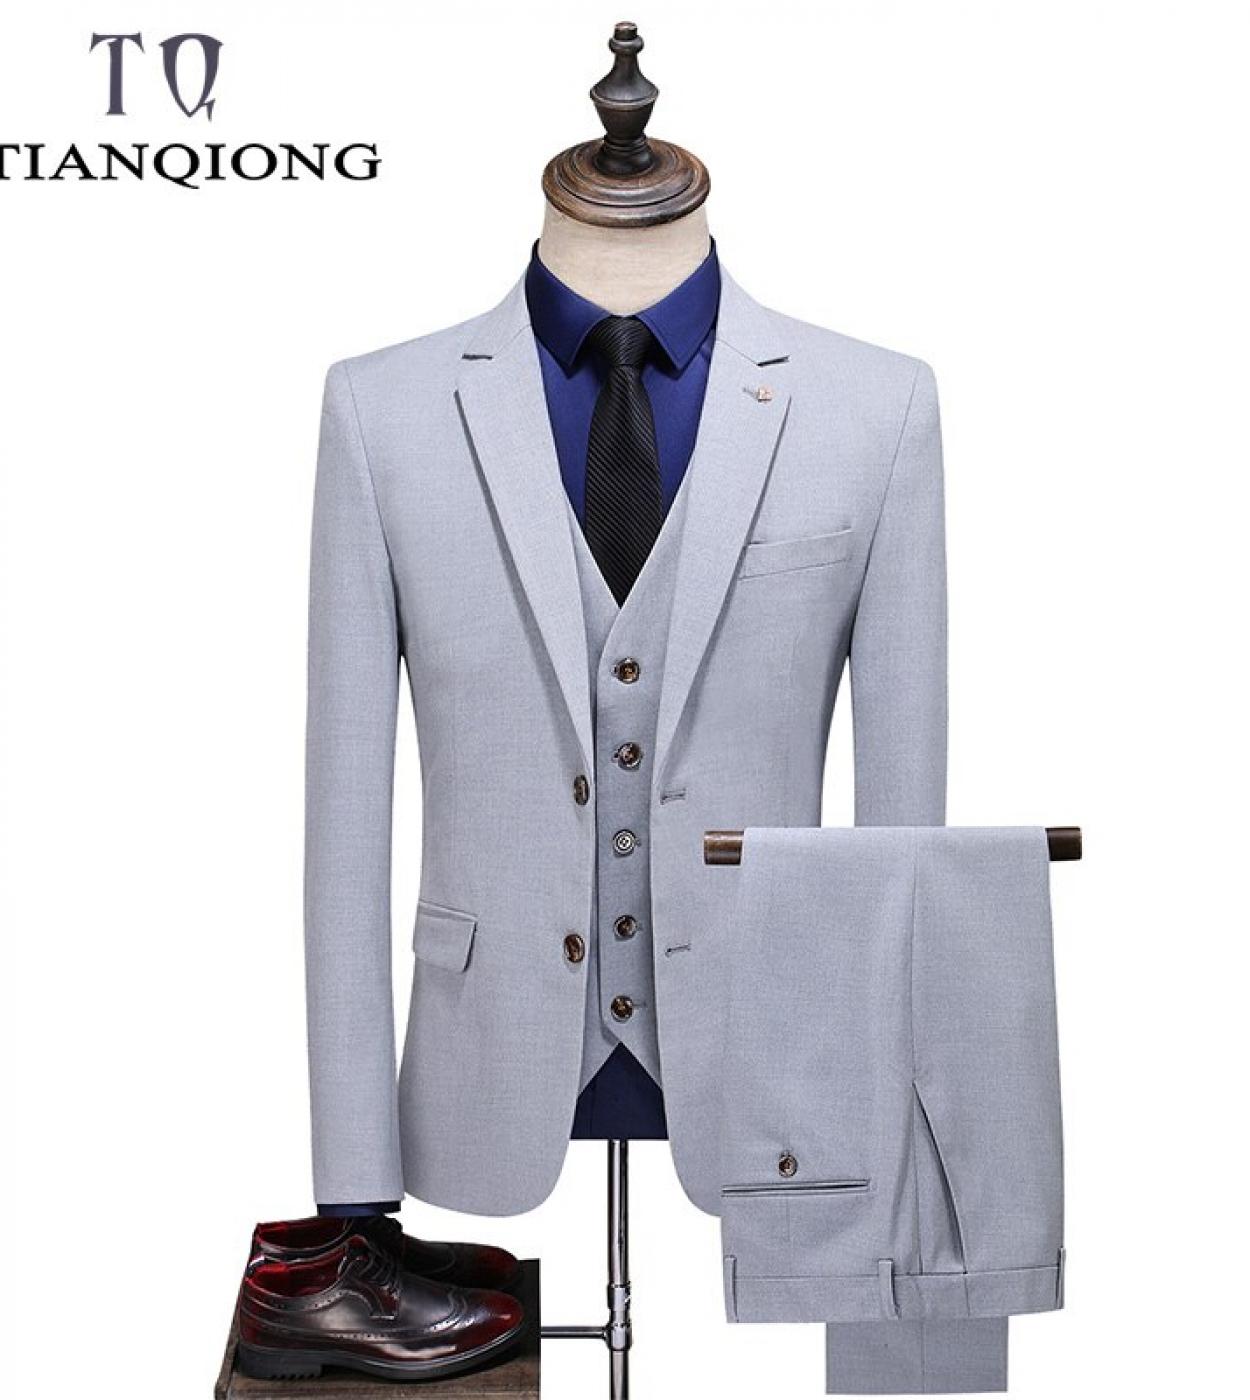 Tian Qiong Mens Business Suits Regular Fit 3 Piece Prom Tuxedos Solid Blazervestpants For Grooms Wedding Partysuits